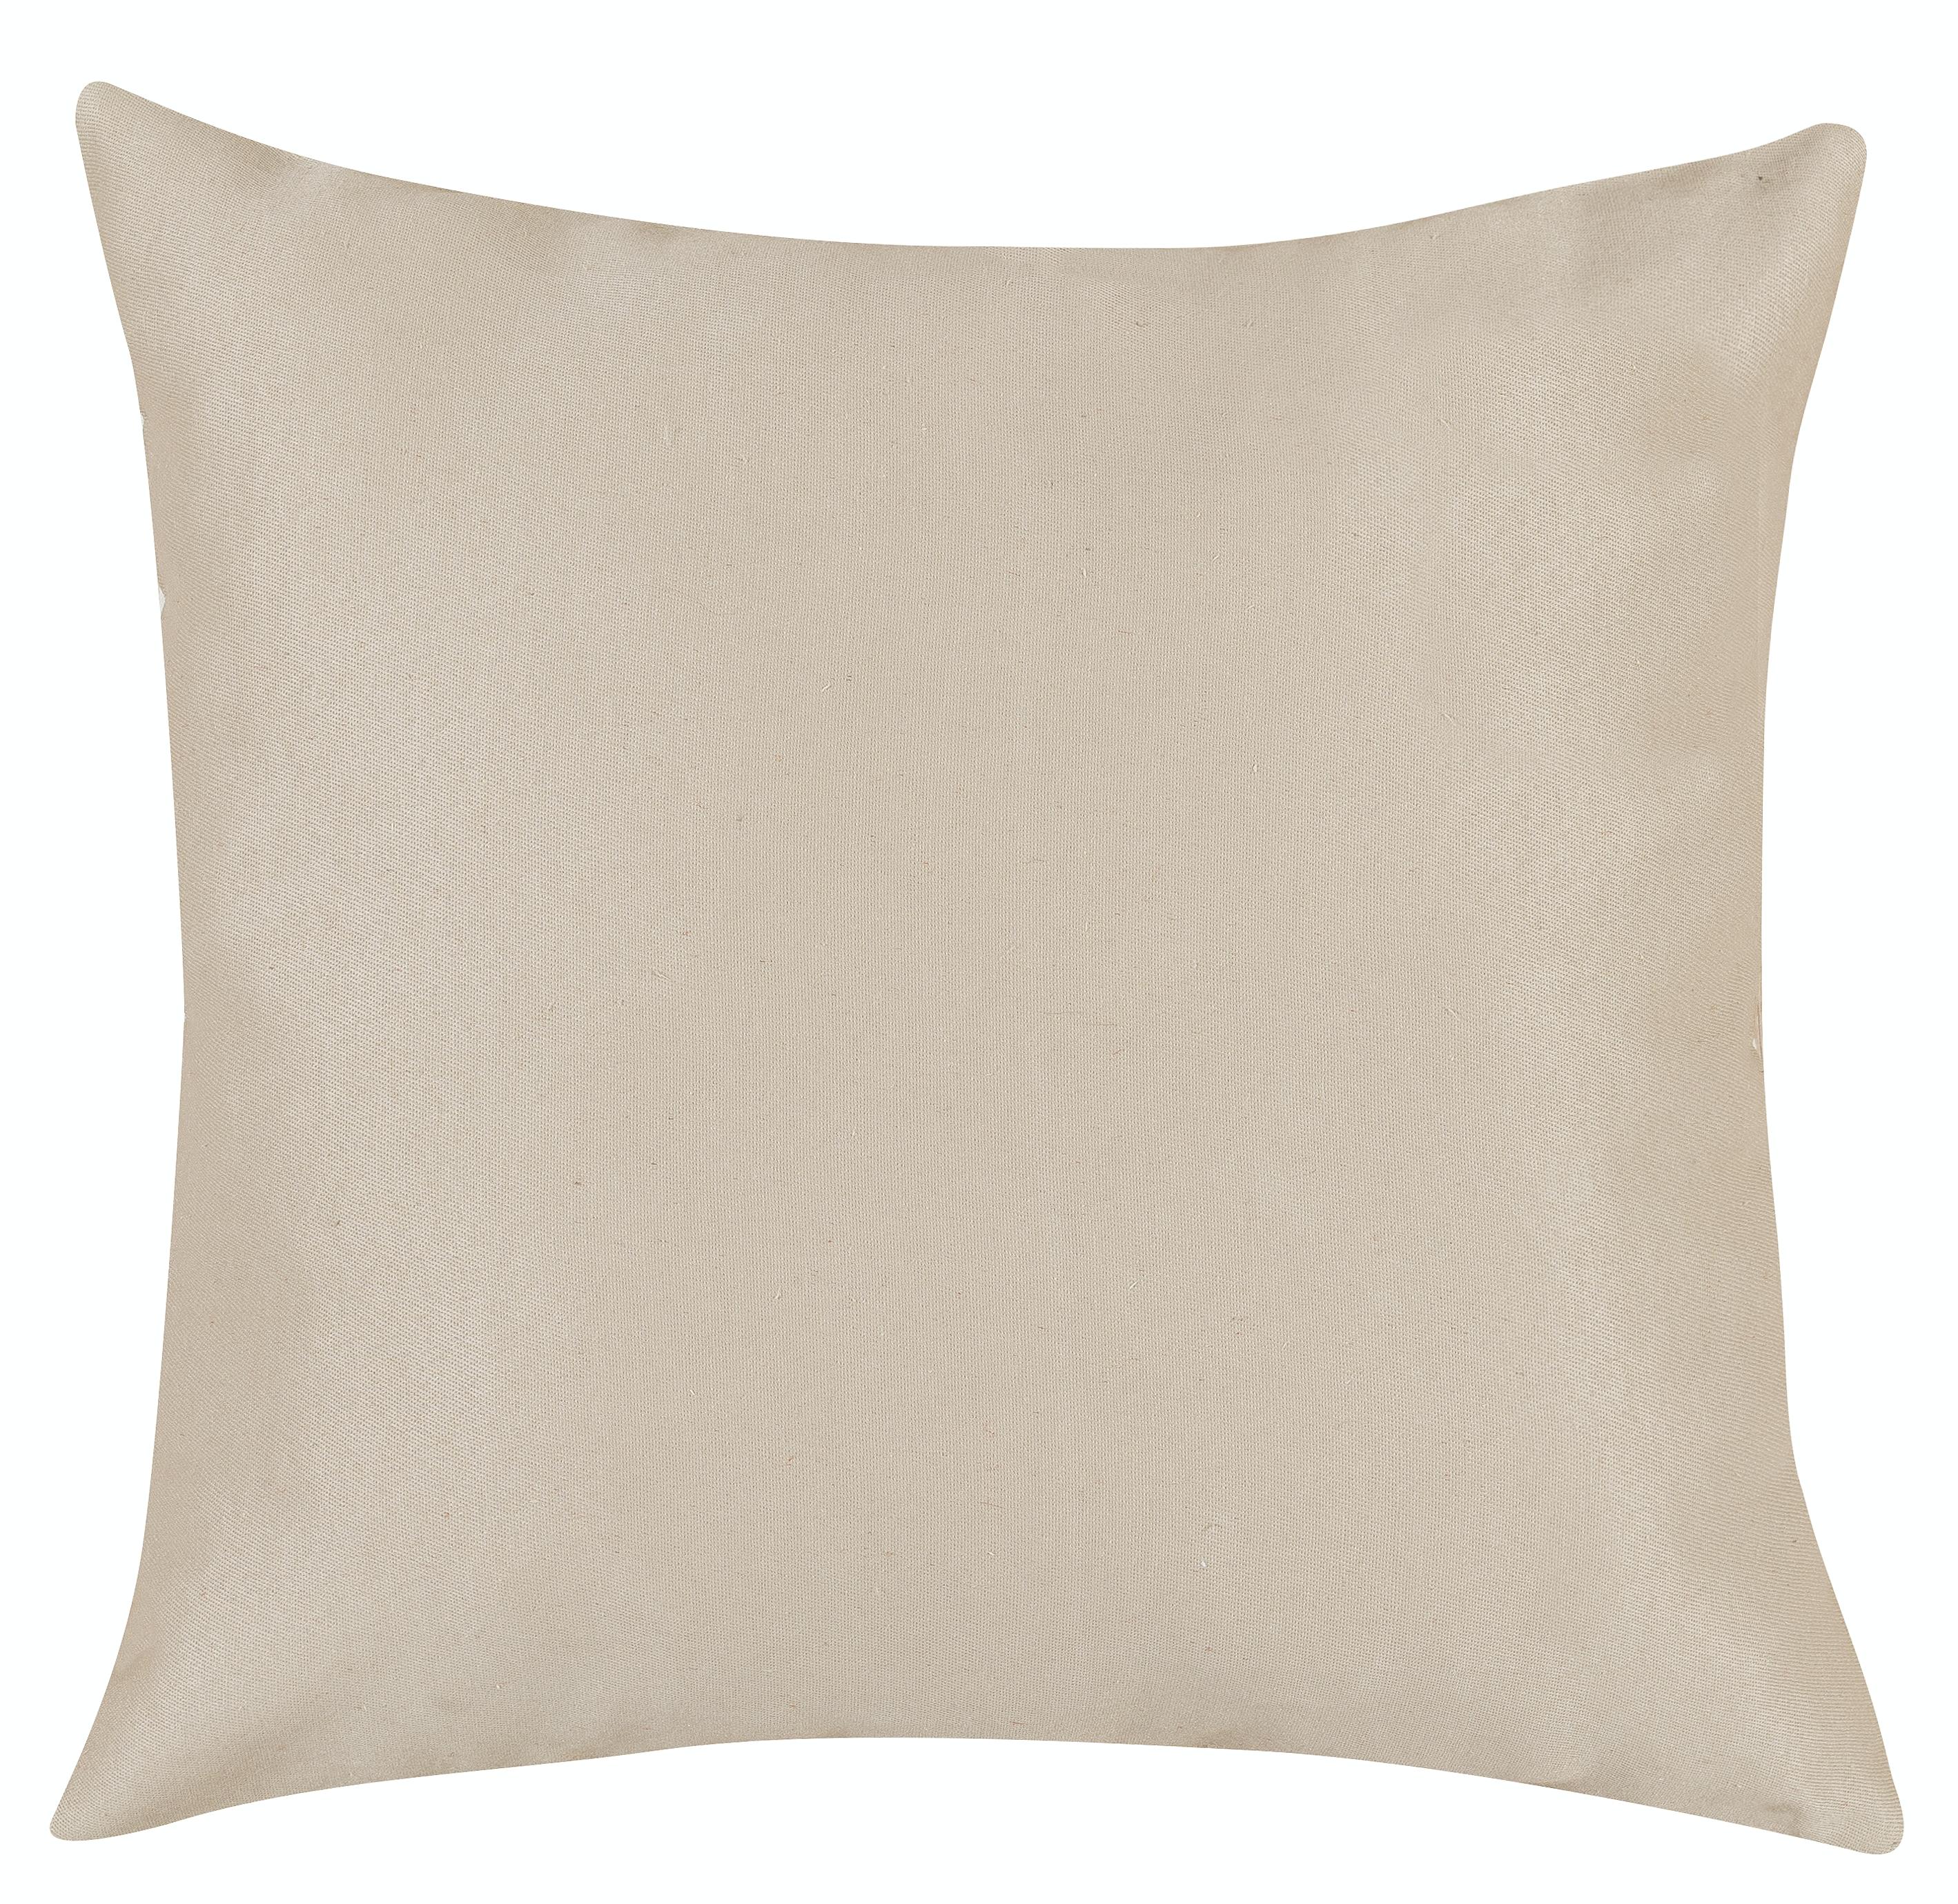 Hand-Woven Uzbek Handmade Suzani Fabric Cushion Cover in Cream and Light Blue For Sale